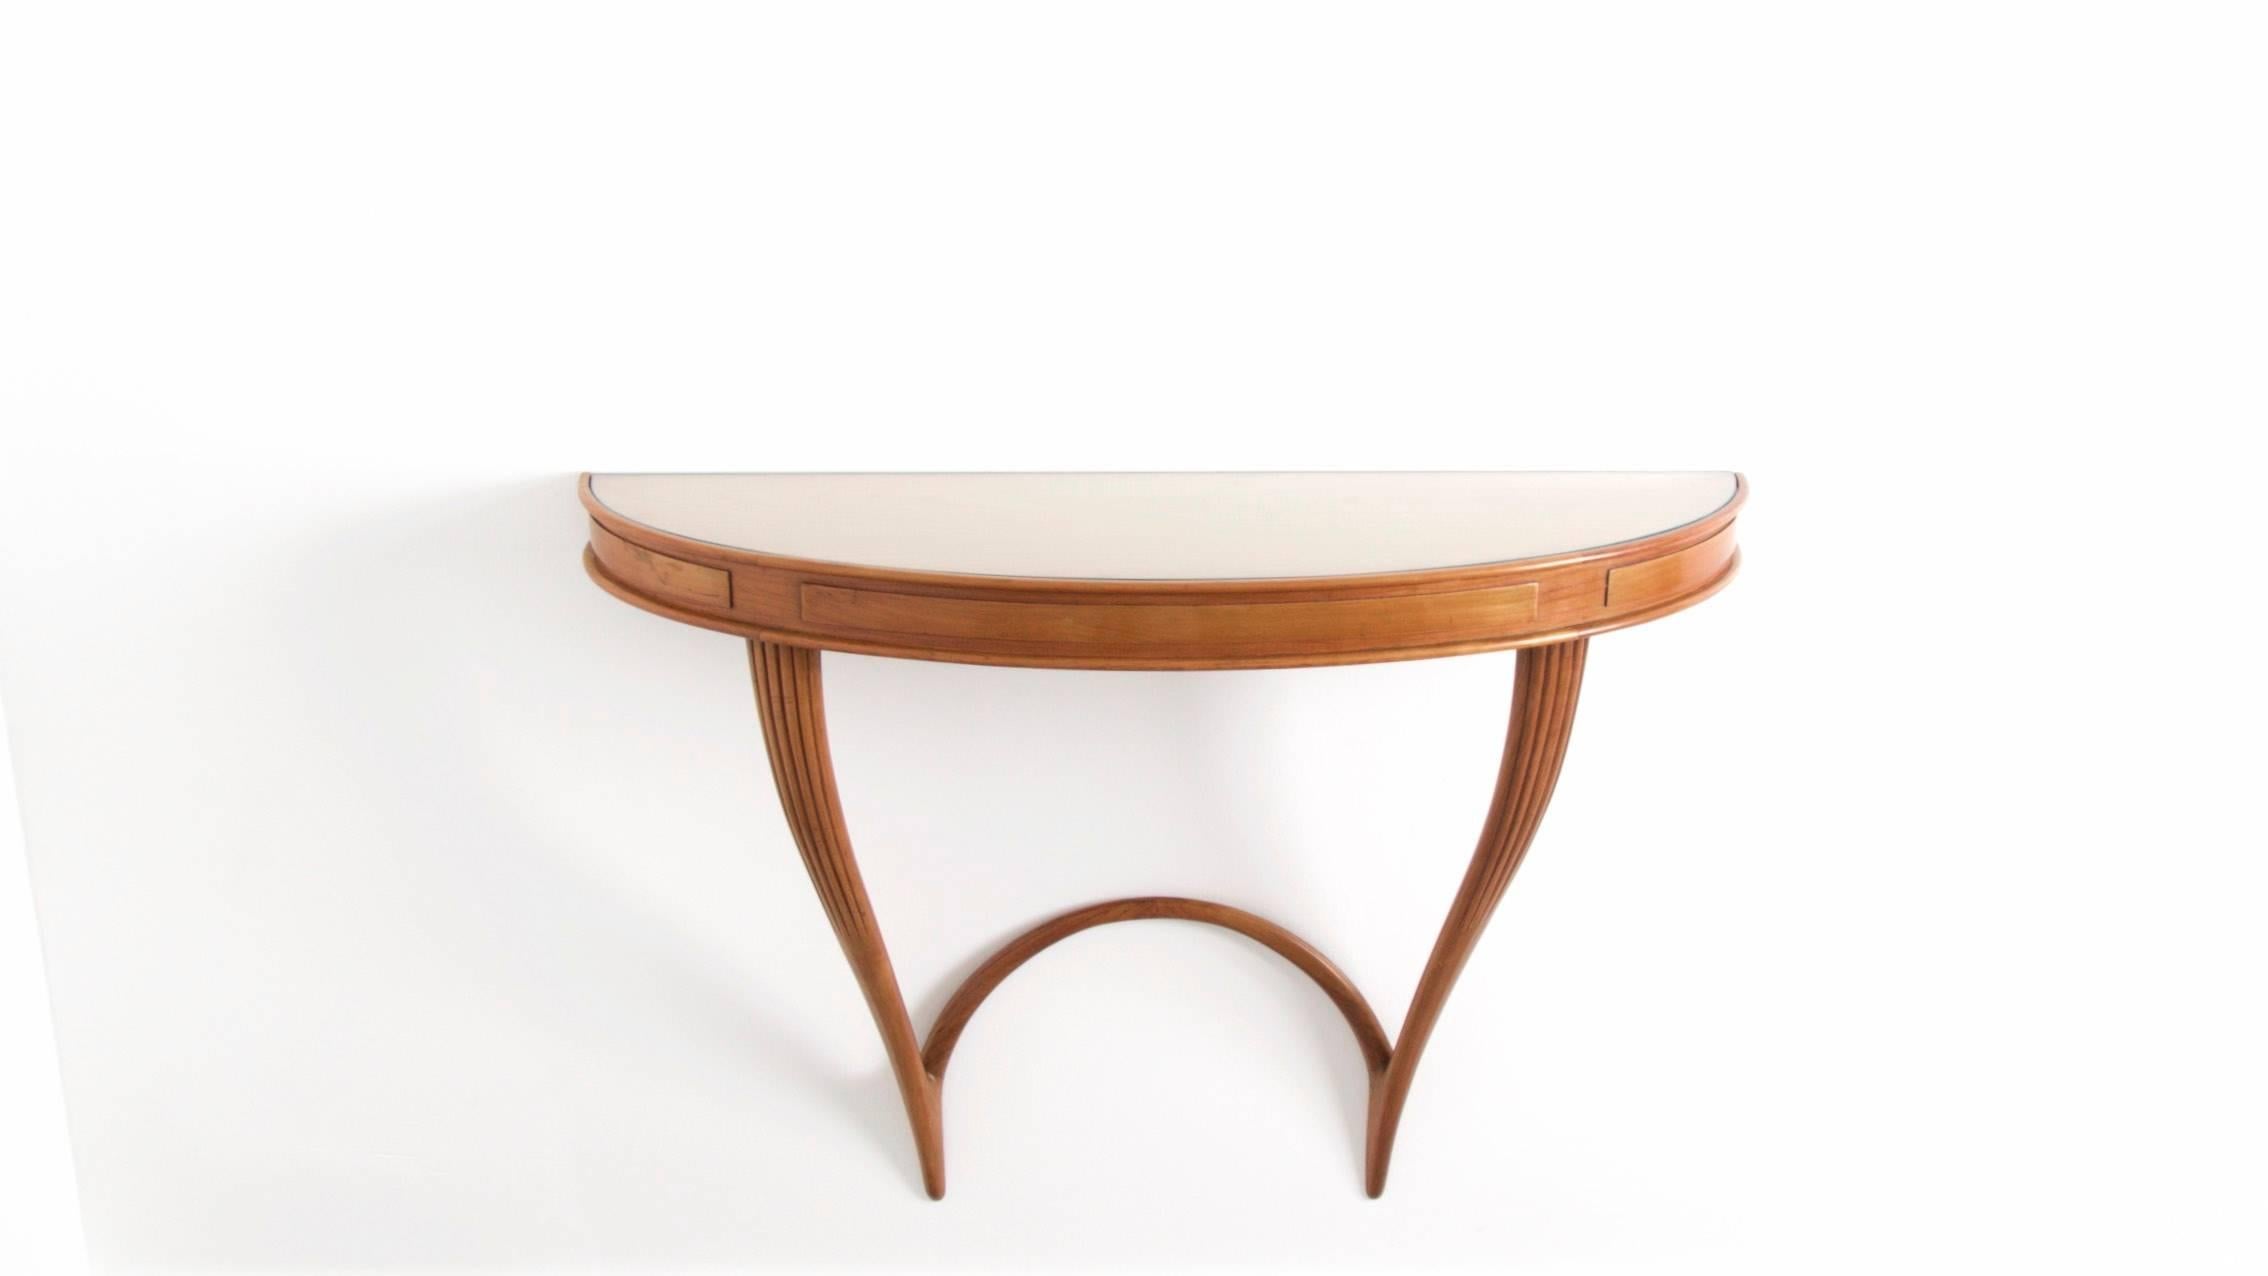 Very elegant Carlo Enrico Rava wall-mounted console in cheery wood with a smoked glass on top. The structure is carved with stripes. Two pieces are available from the same model. This one is 100 cm large. The other is 130 cm large. They can be